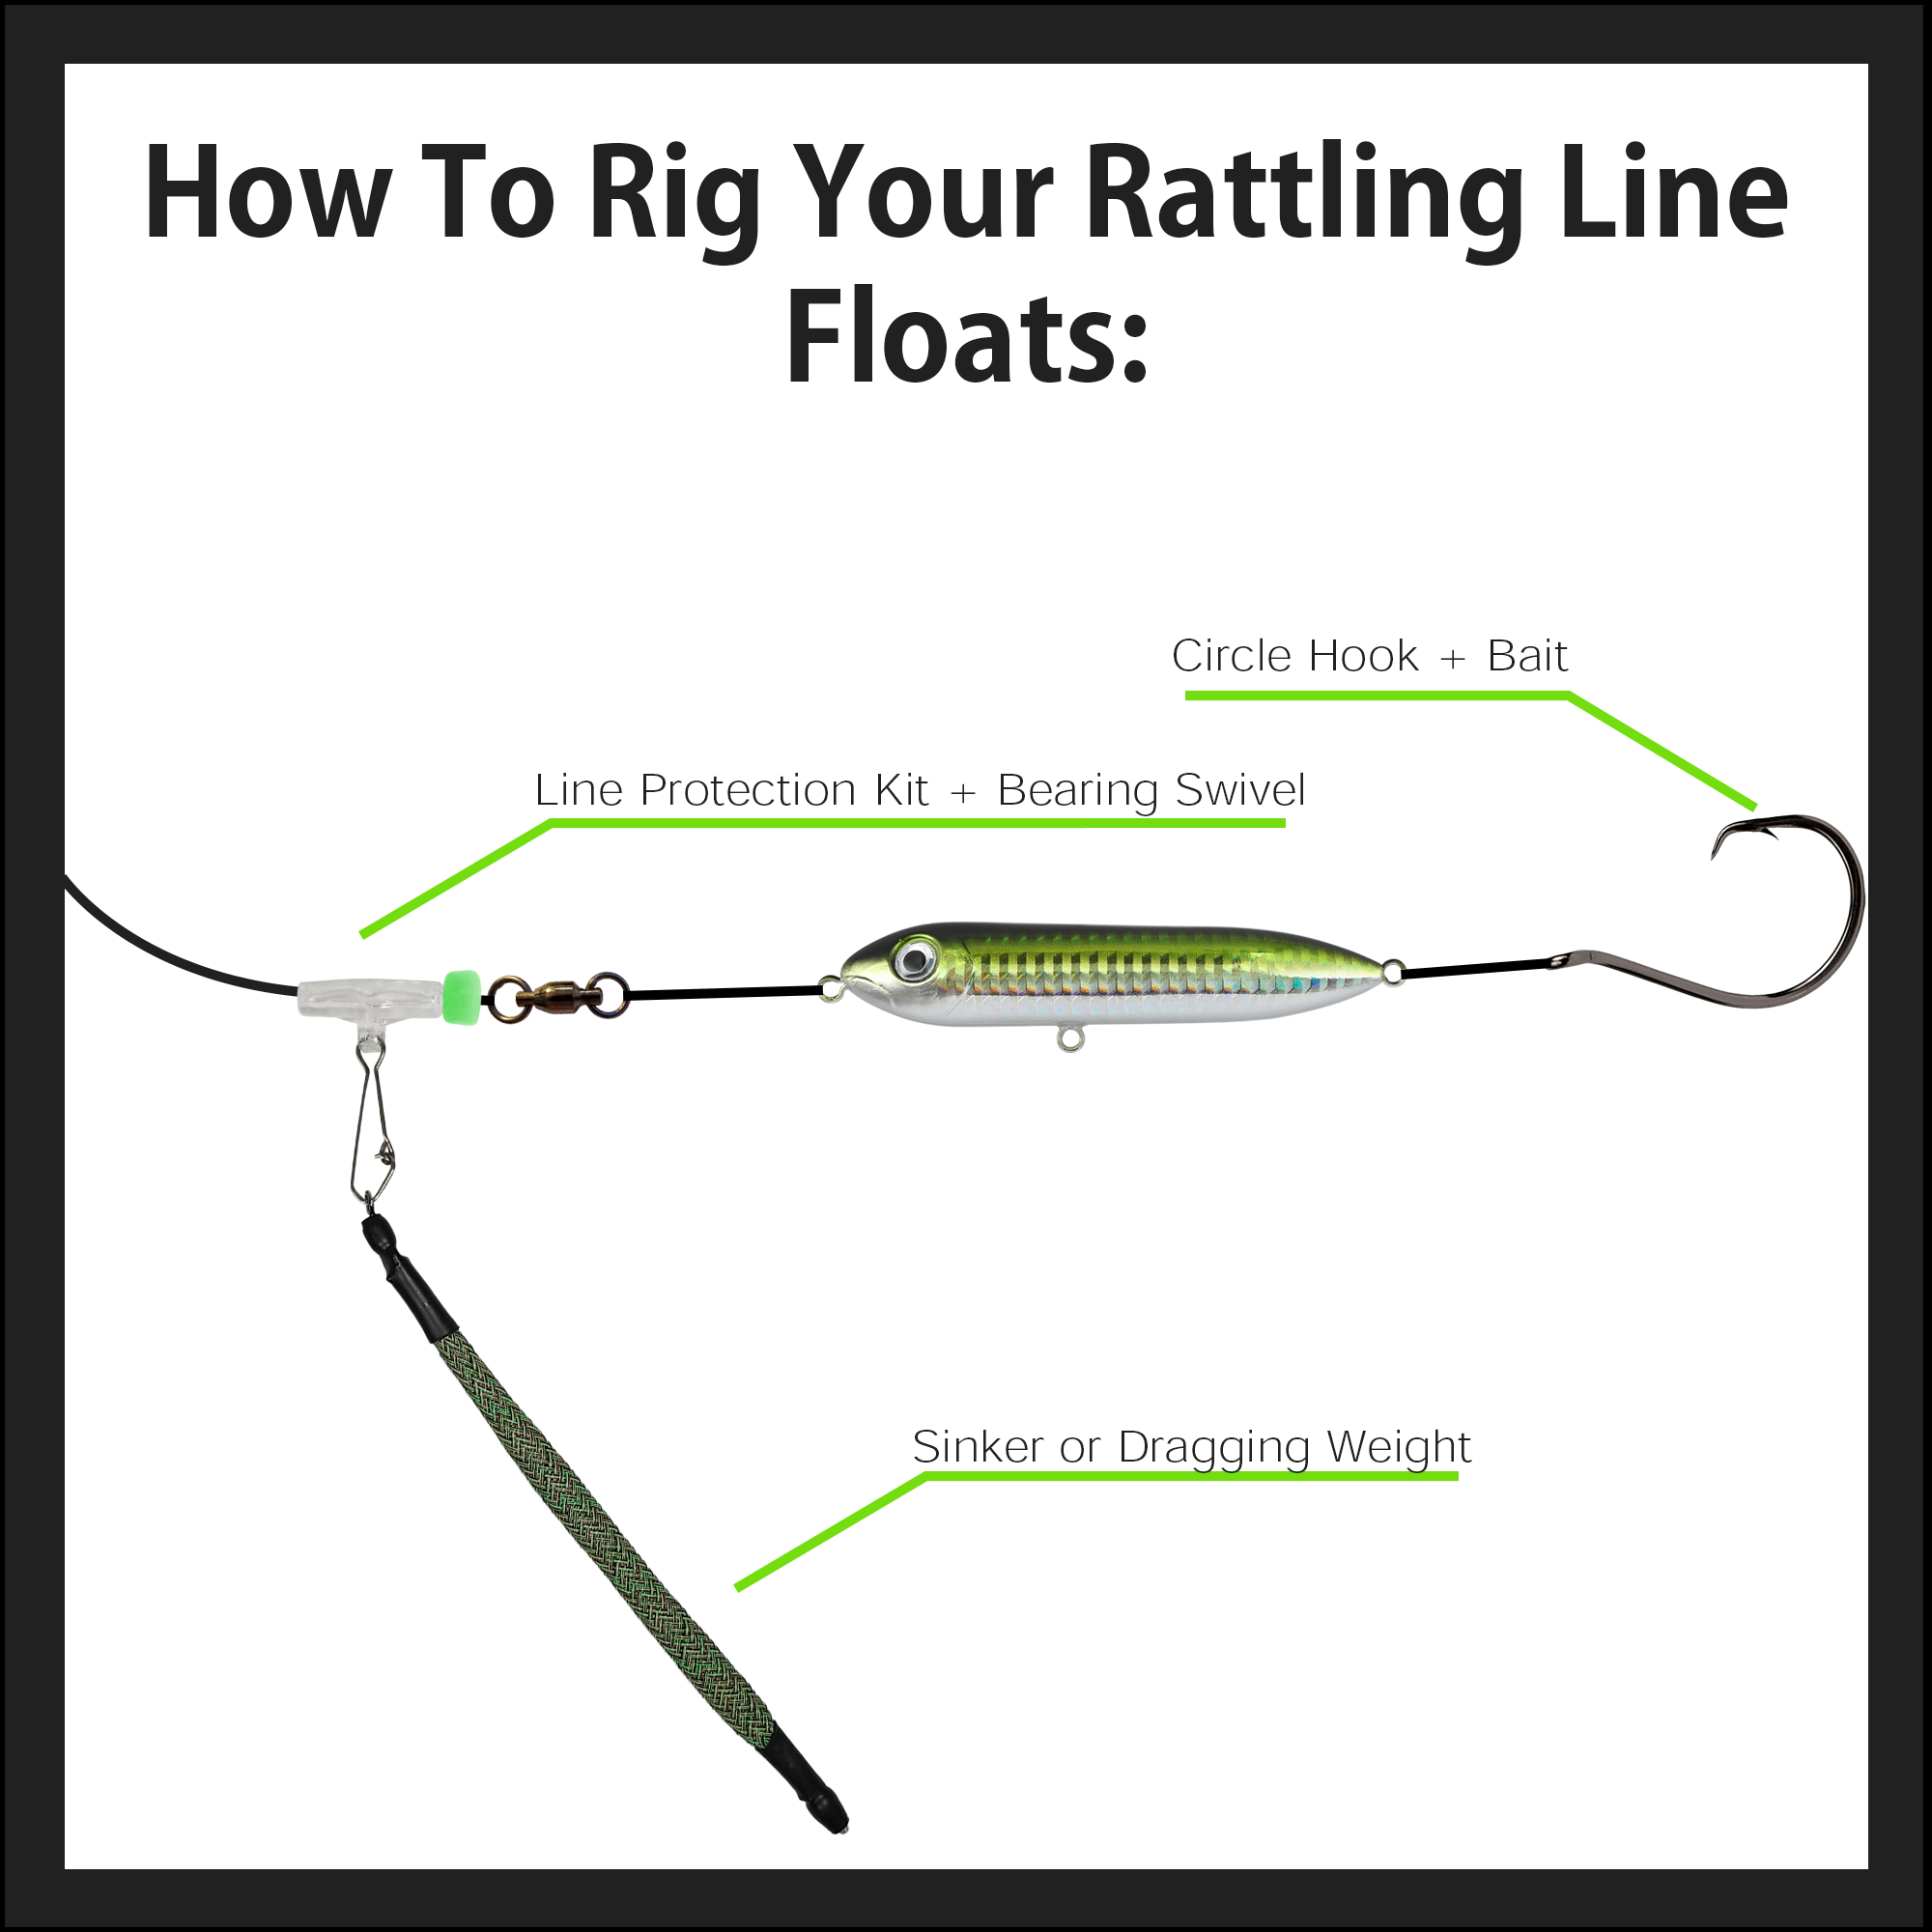 Catfish Rattling Line Float Lure for Catfishing, Demon Dragon Style Peg for Santee Rig Fishing, 4 inch (3 Pack, Demon Tiger)